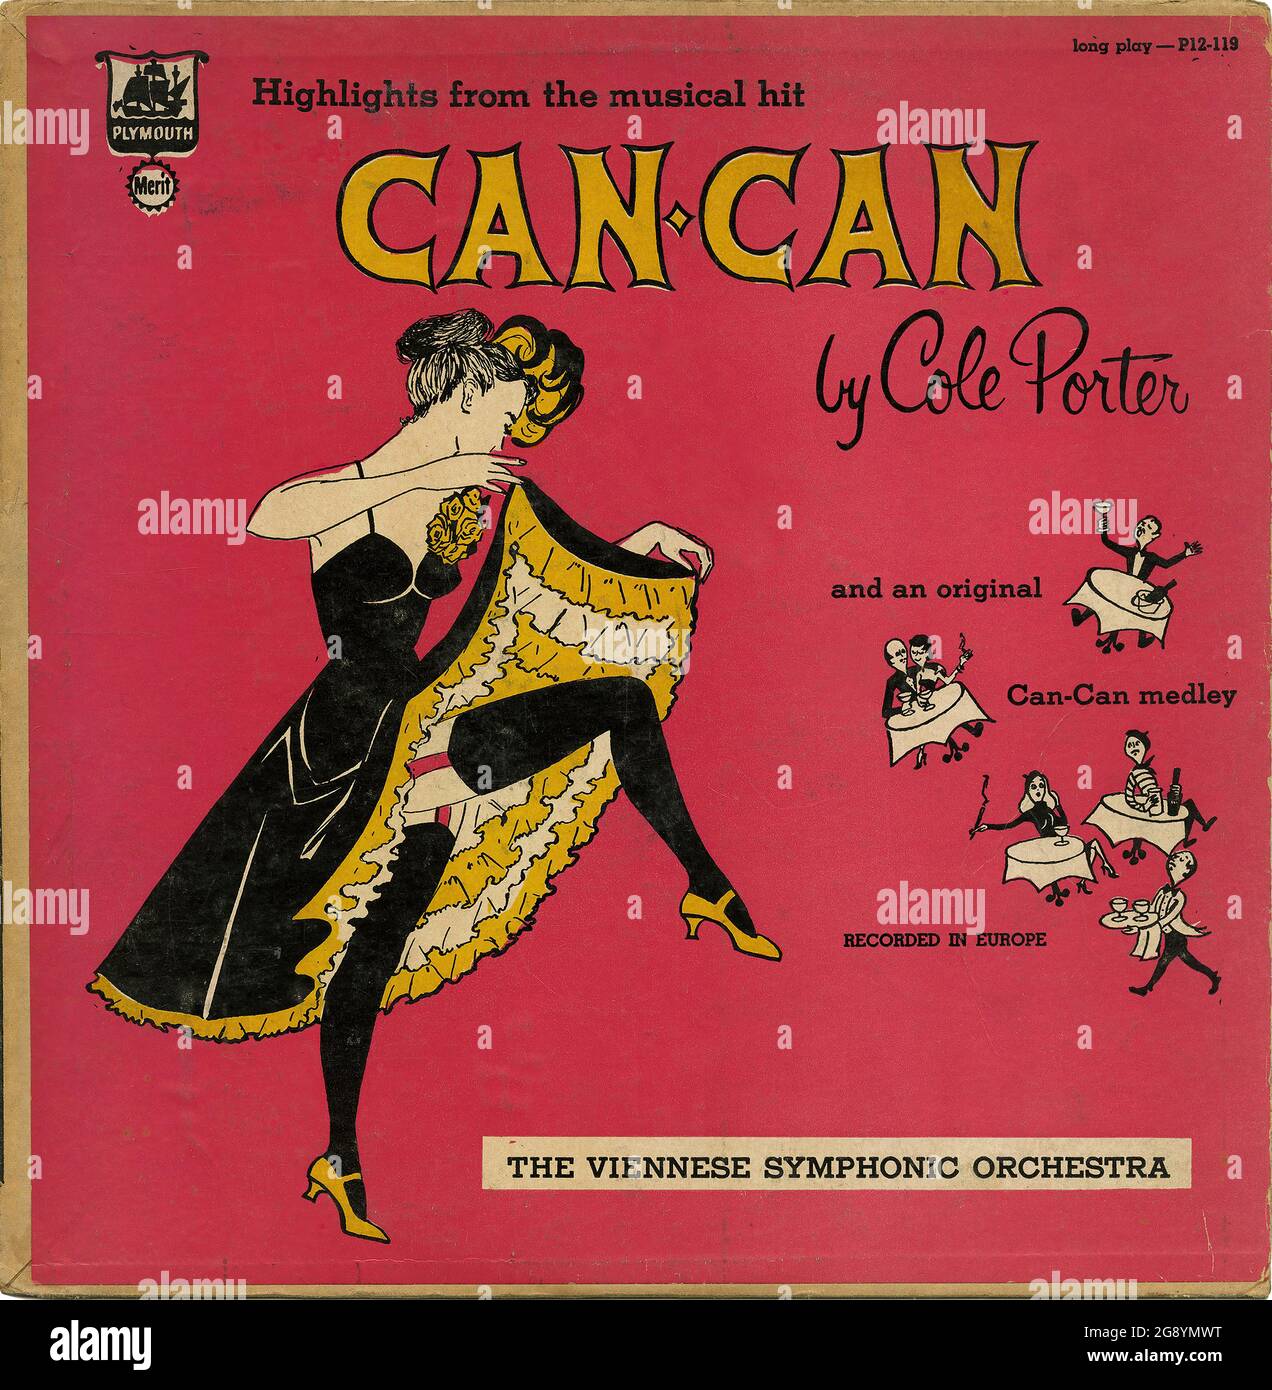 Highlights from the musical hit Can-Can by Cole Porter - Vintage Vinyl Record Cover Stock Photo